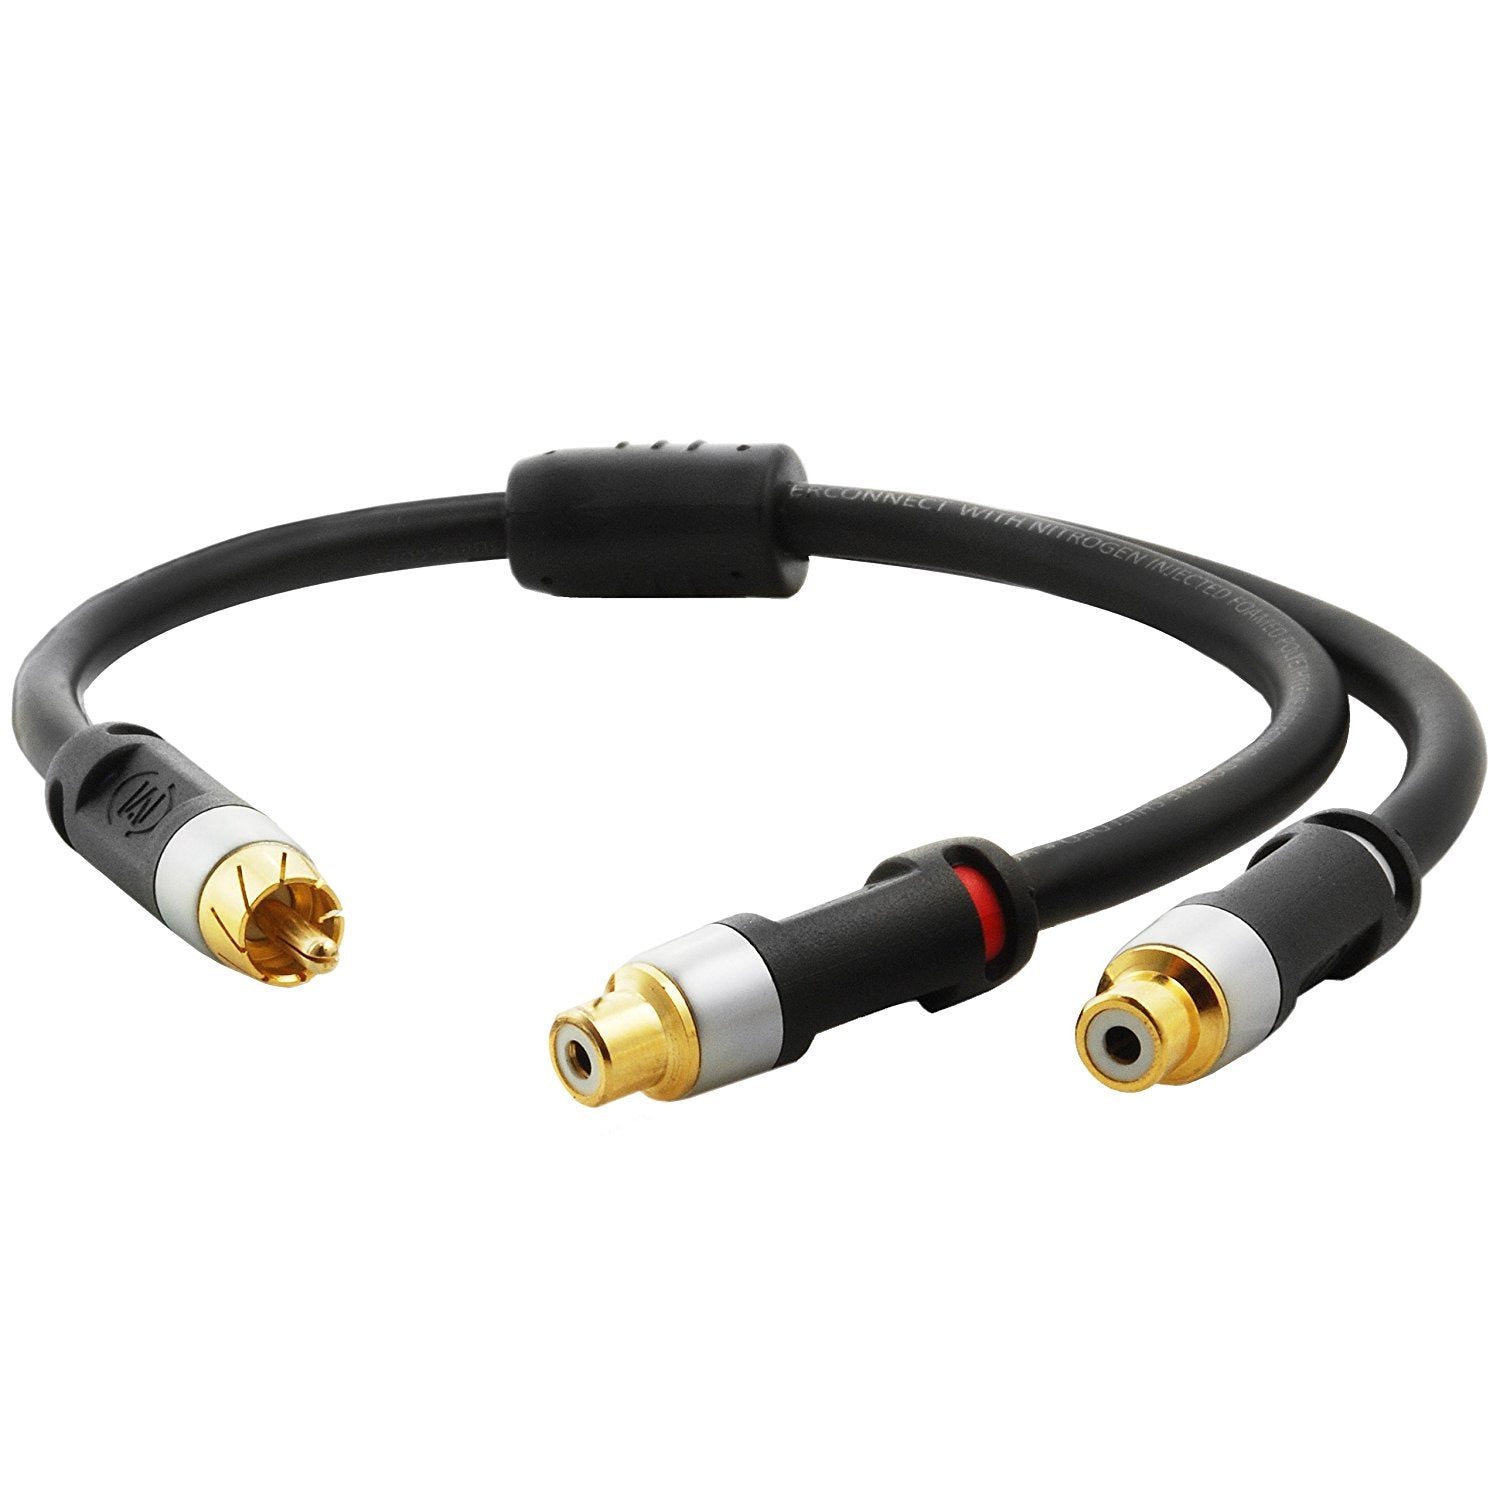 Audio cable with 3.5mm male jack and two female RCA connectors